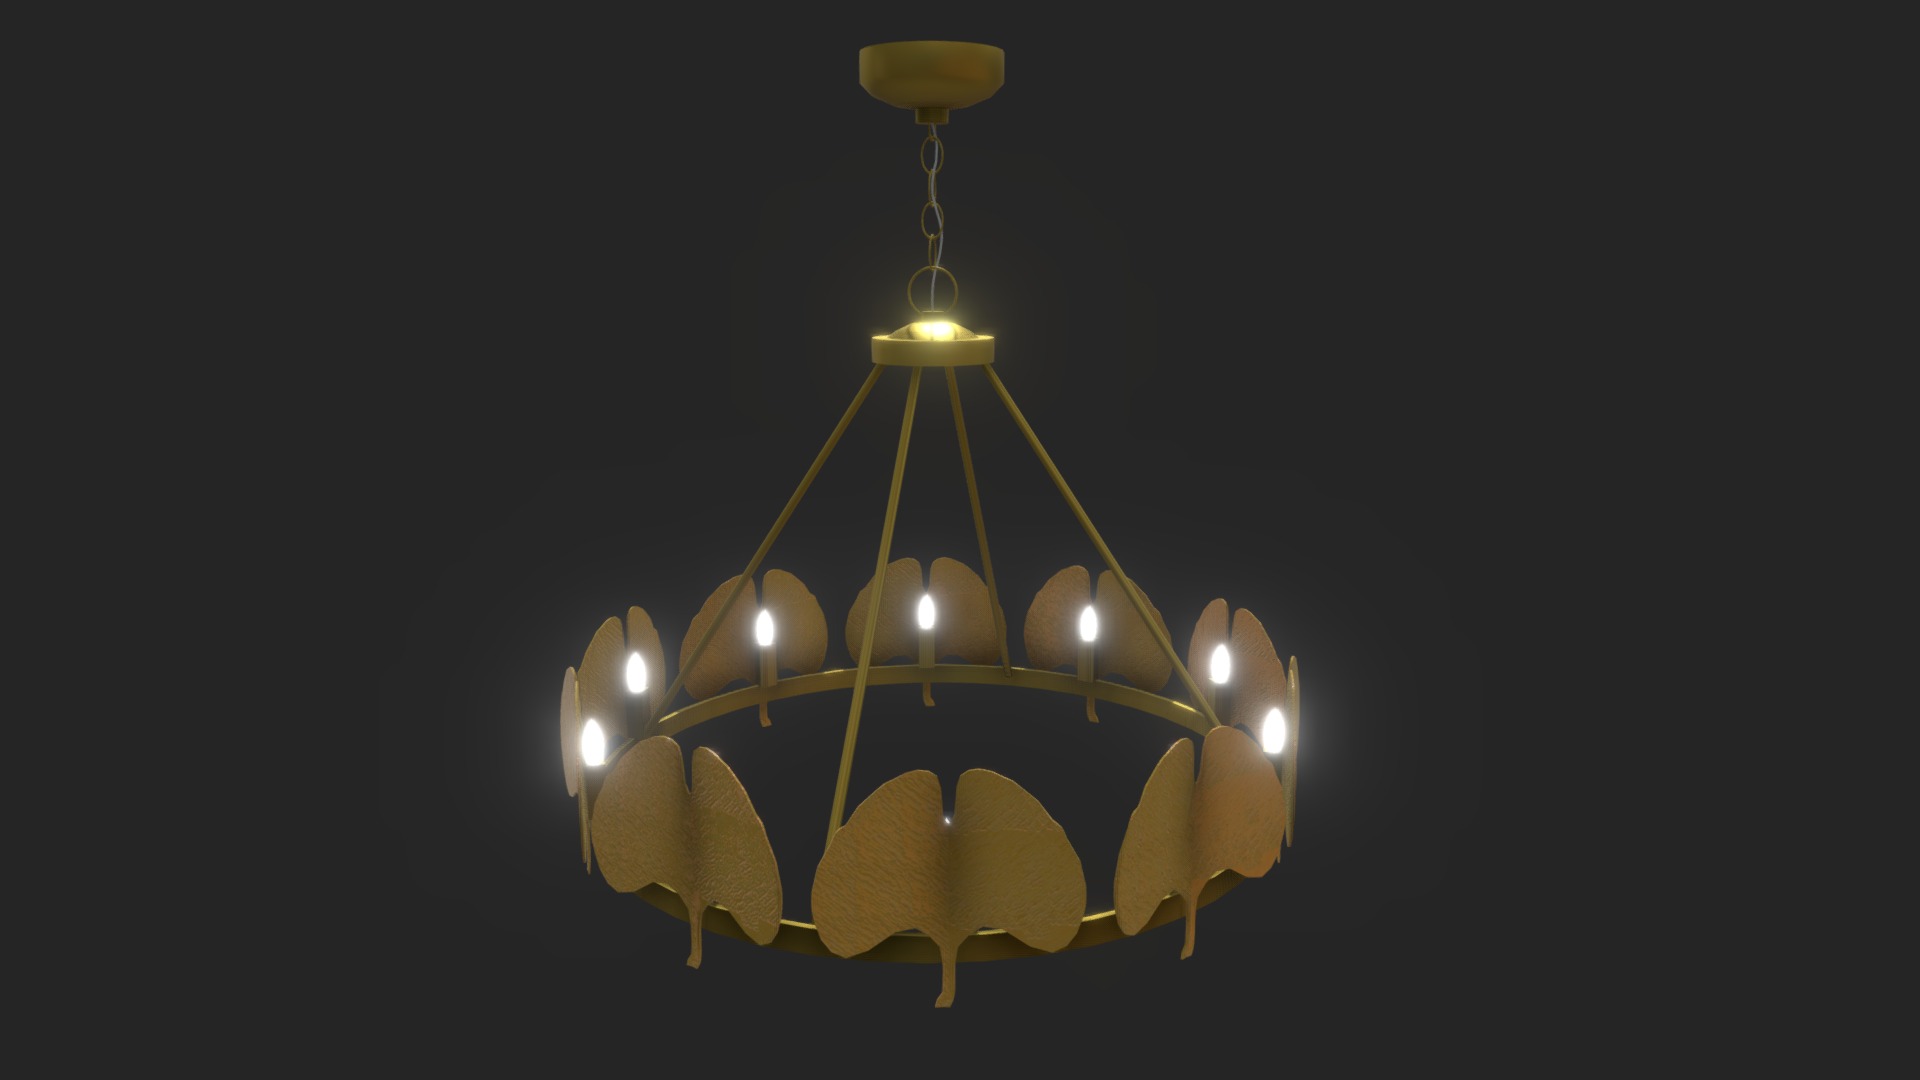 3D model HGP2018CL-23 - This is a 3D model of the HGP2018CL-23. The 3D model is about a chandelier with lights.